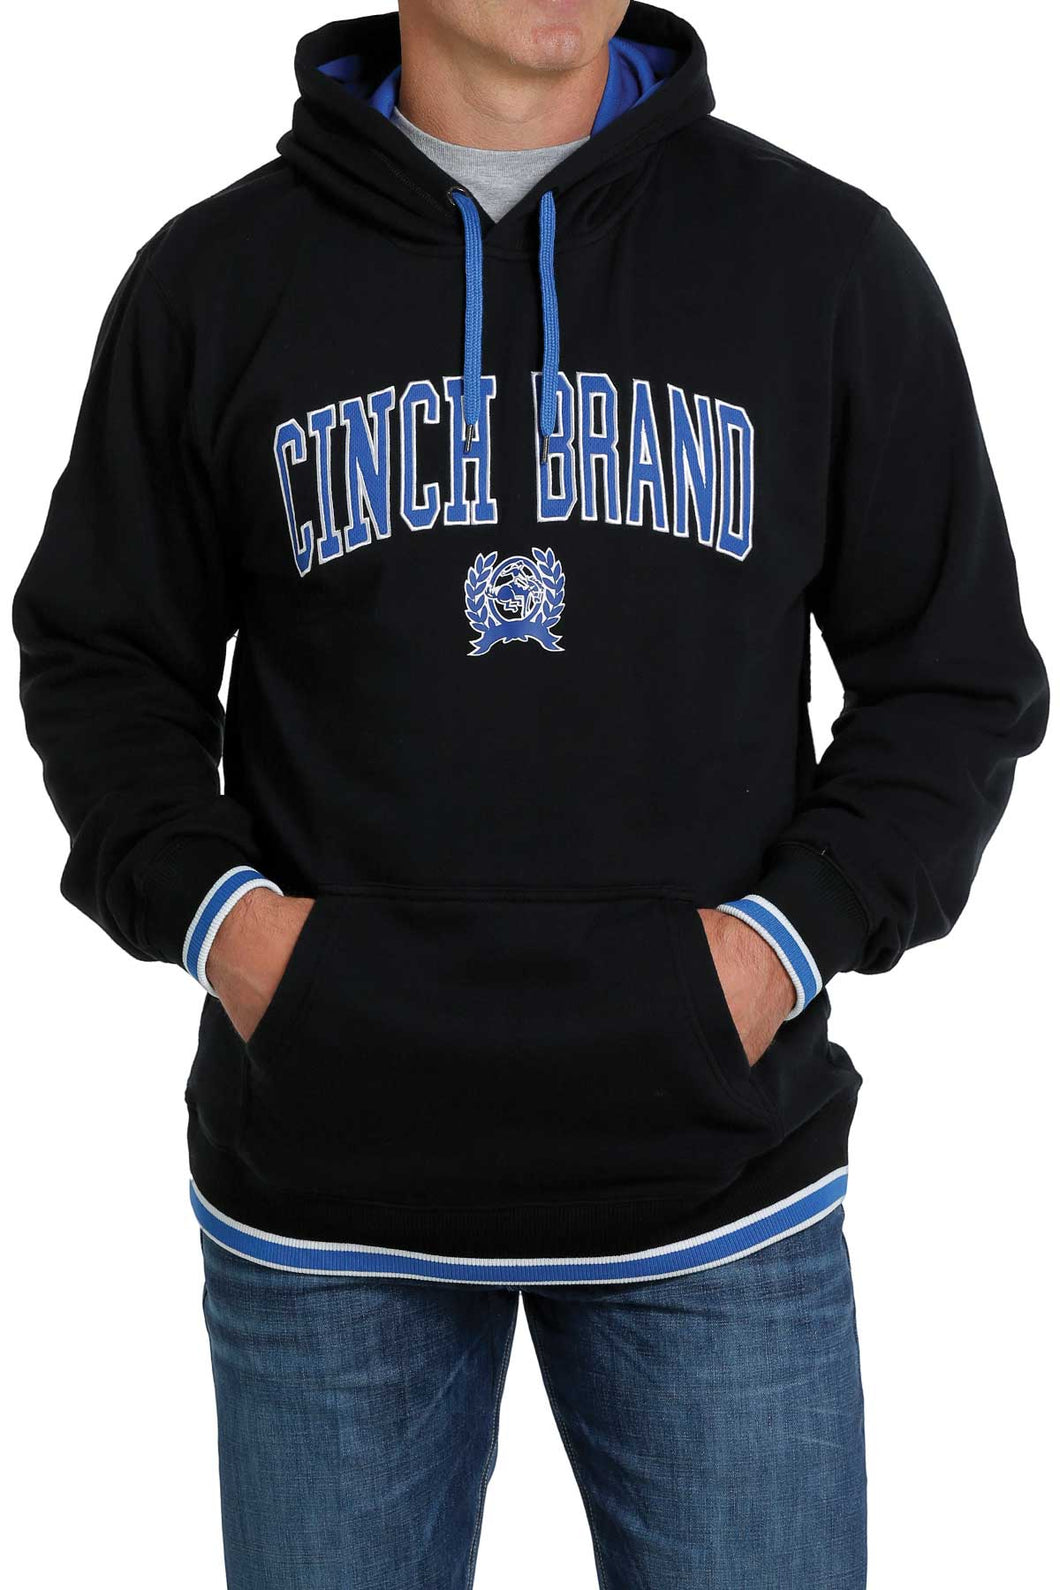 Men's Black with Royal Blue Cinch Logo Pullover Hoodie